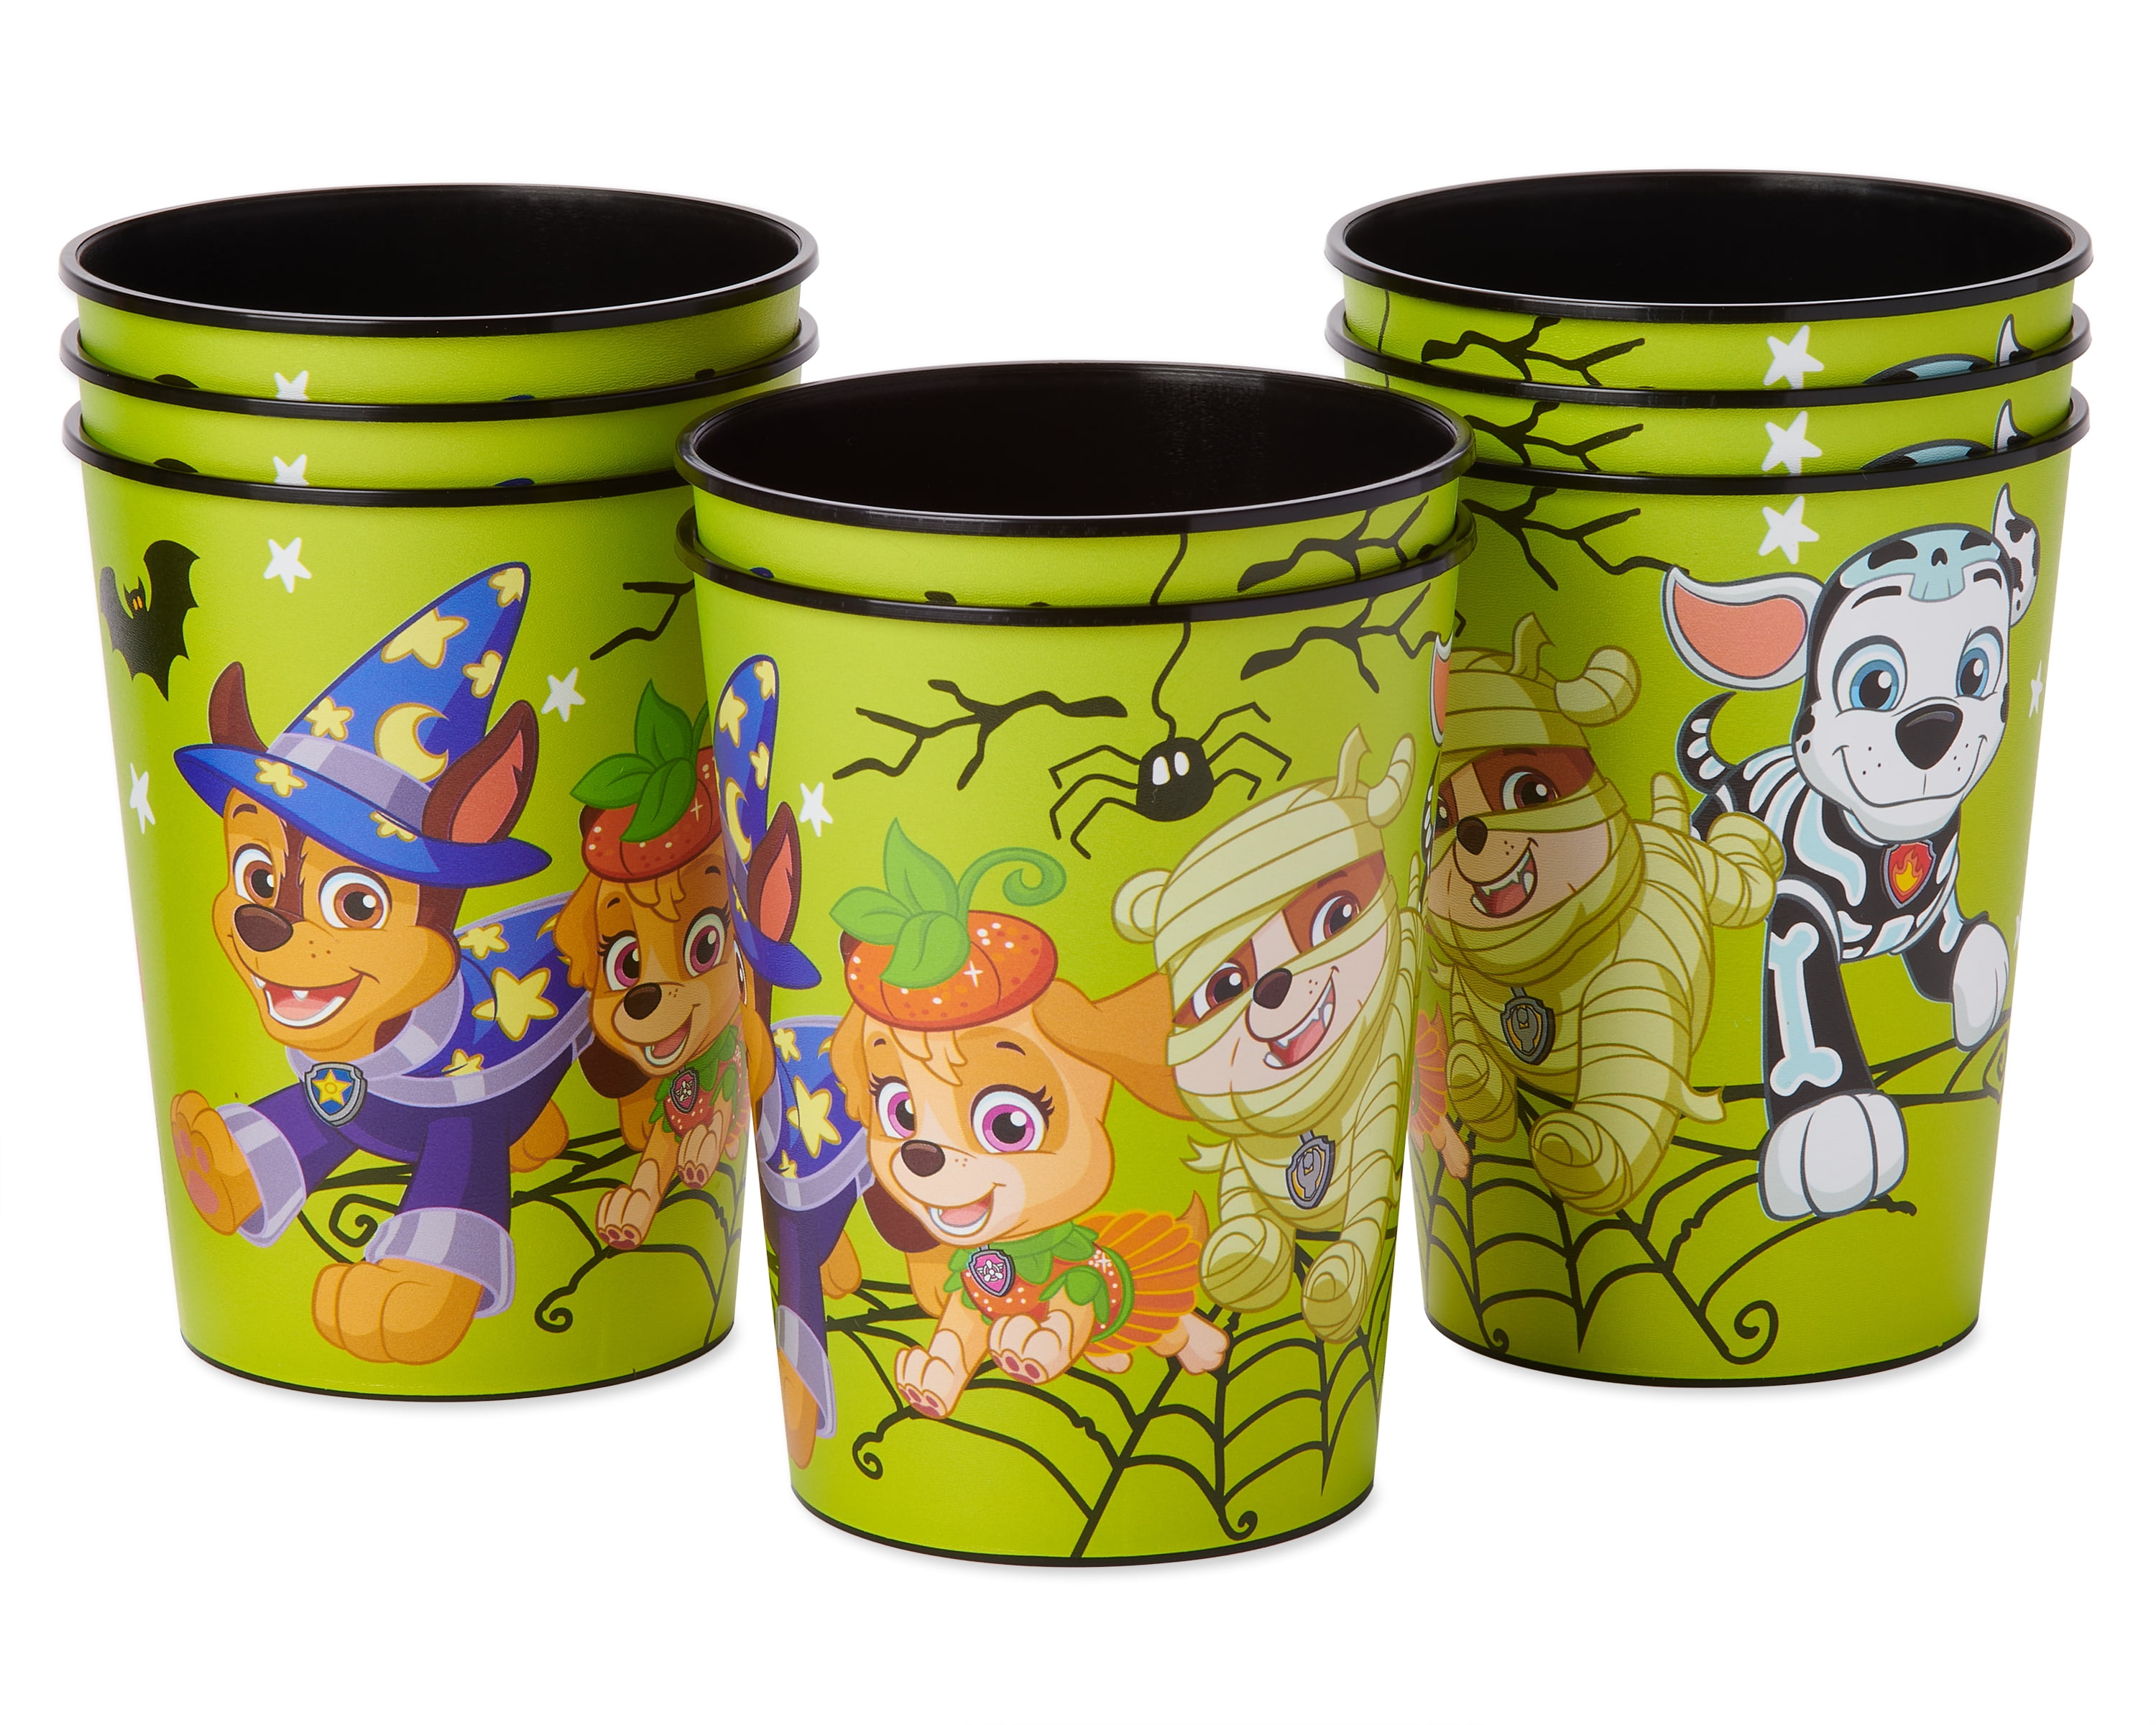 American Greetings Kids Halloween Party Supplies Paw Patrol Party Cups 8-Count